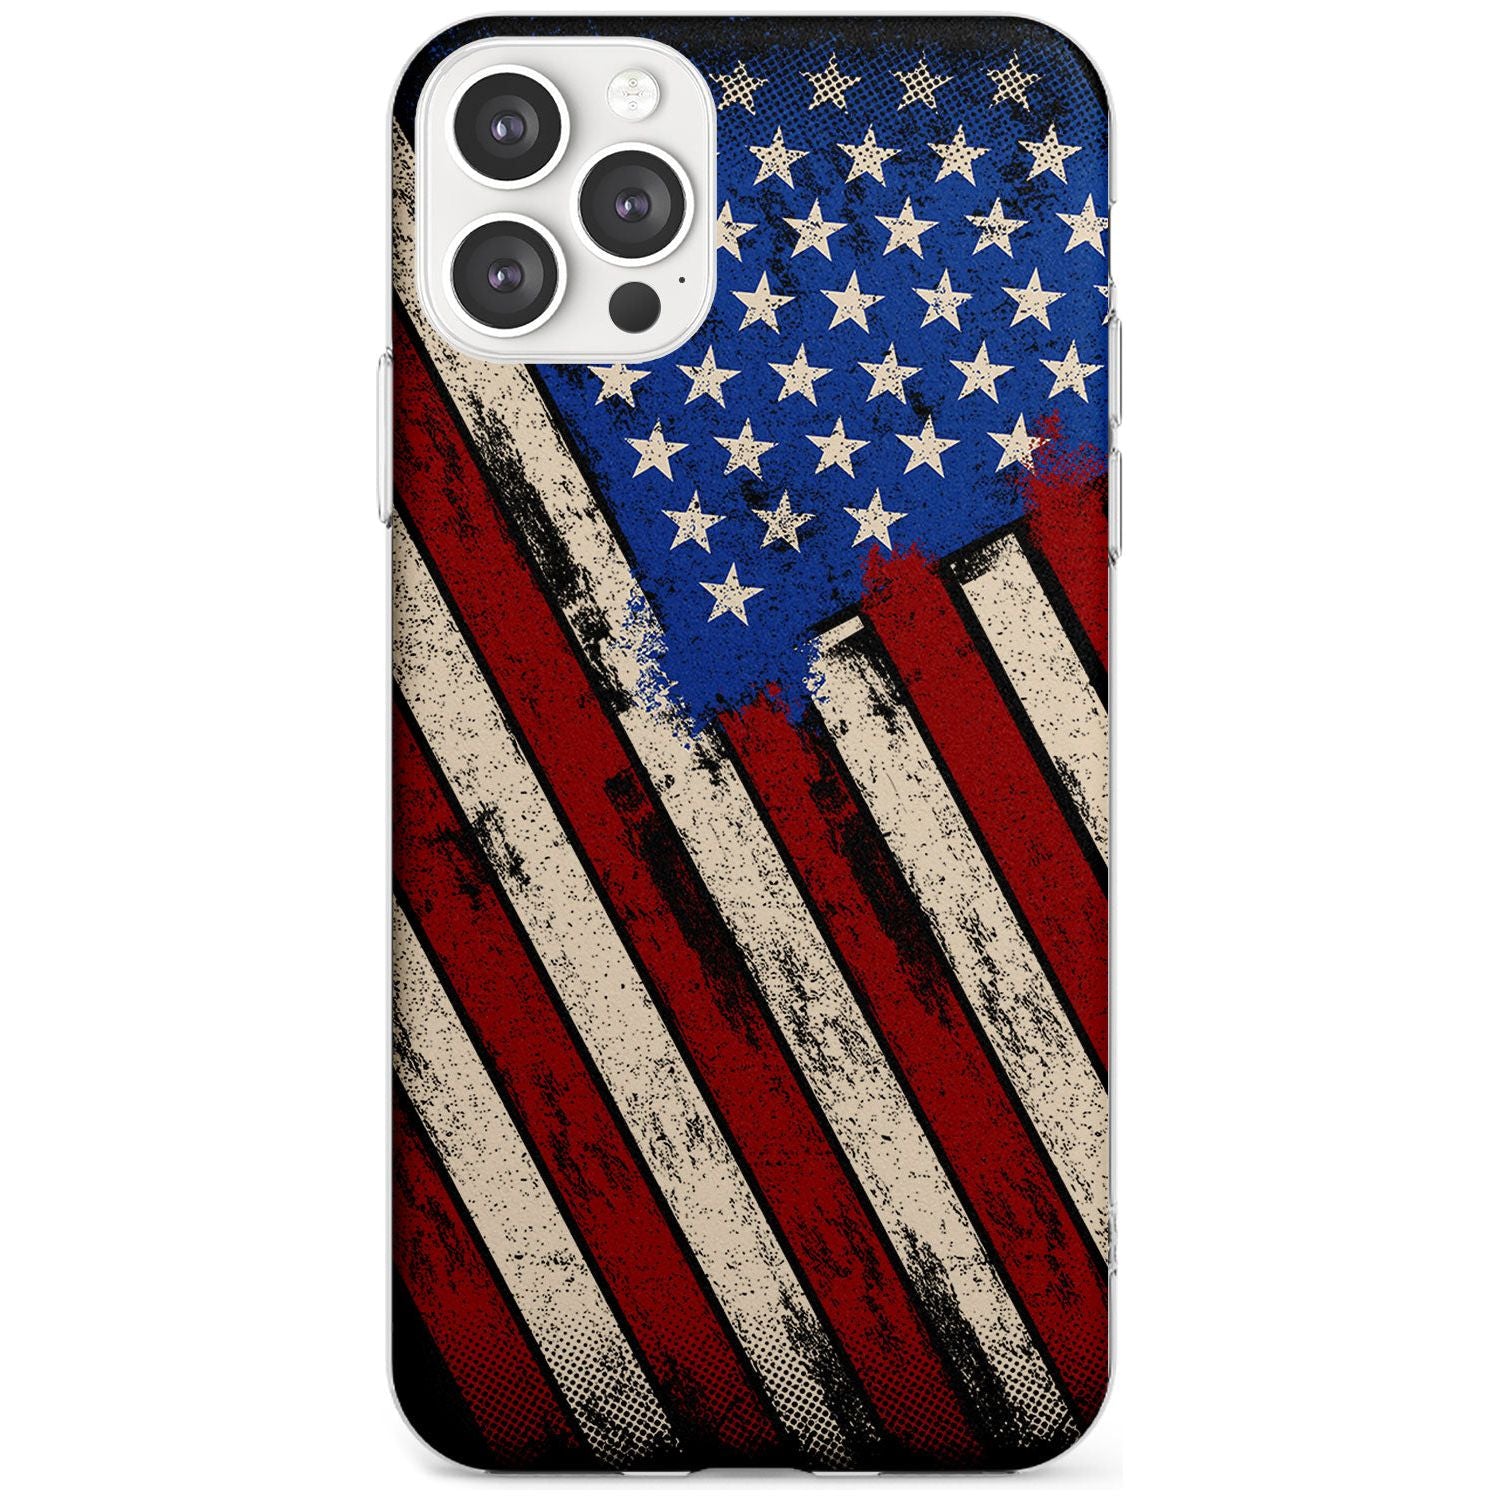 Distressed US Flag Slim TPU Phone Case for iPhone 11 Pro Max